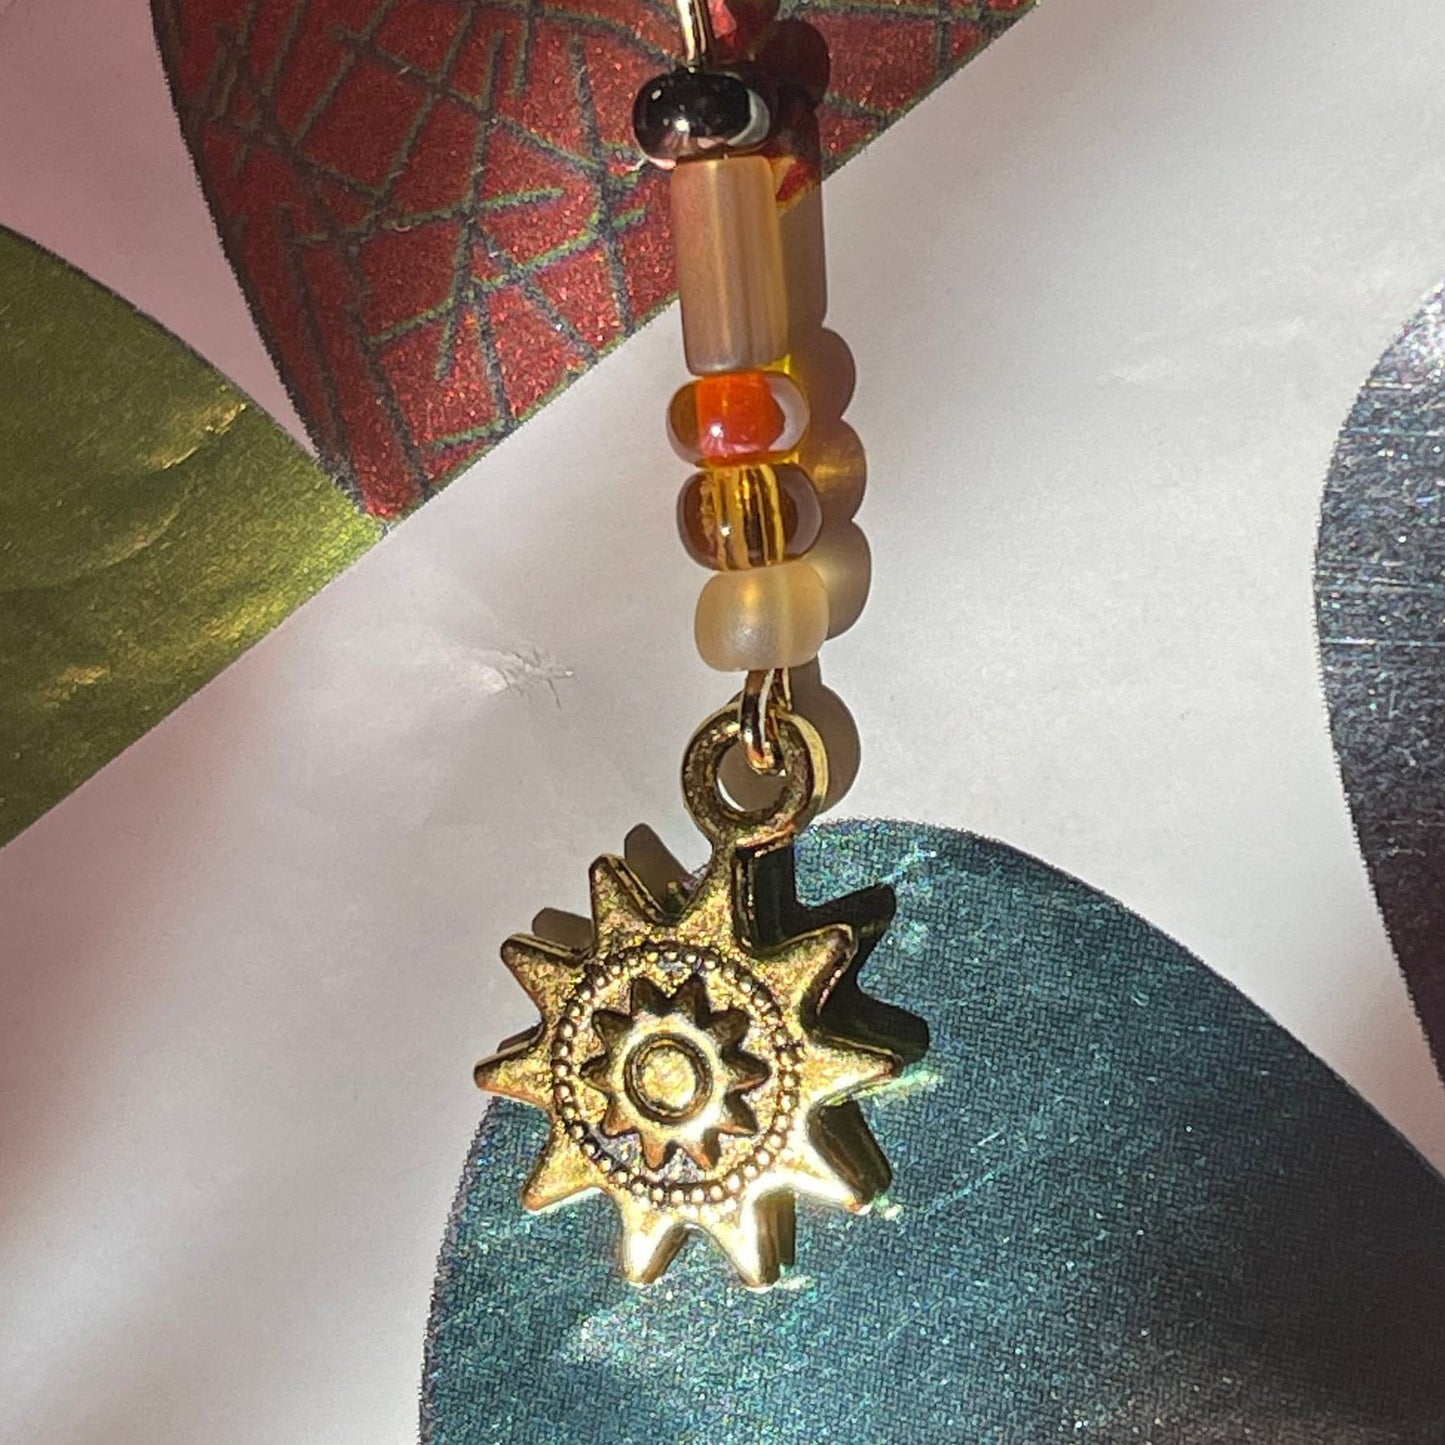 Sun charm gold tone pendant - antique golden charm - boho fashion brass compass - steampunk style - double sided -beaded drop - choose color